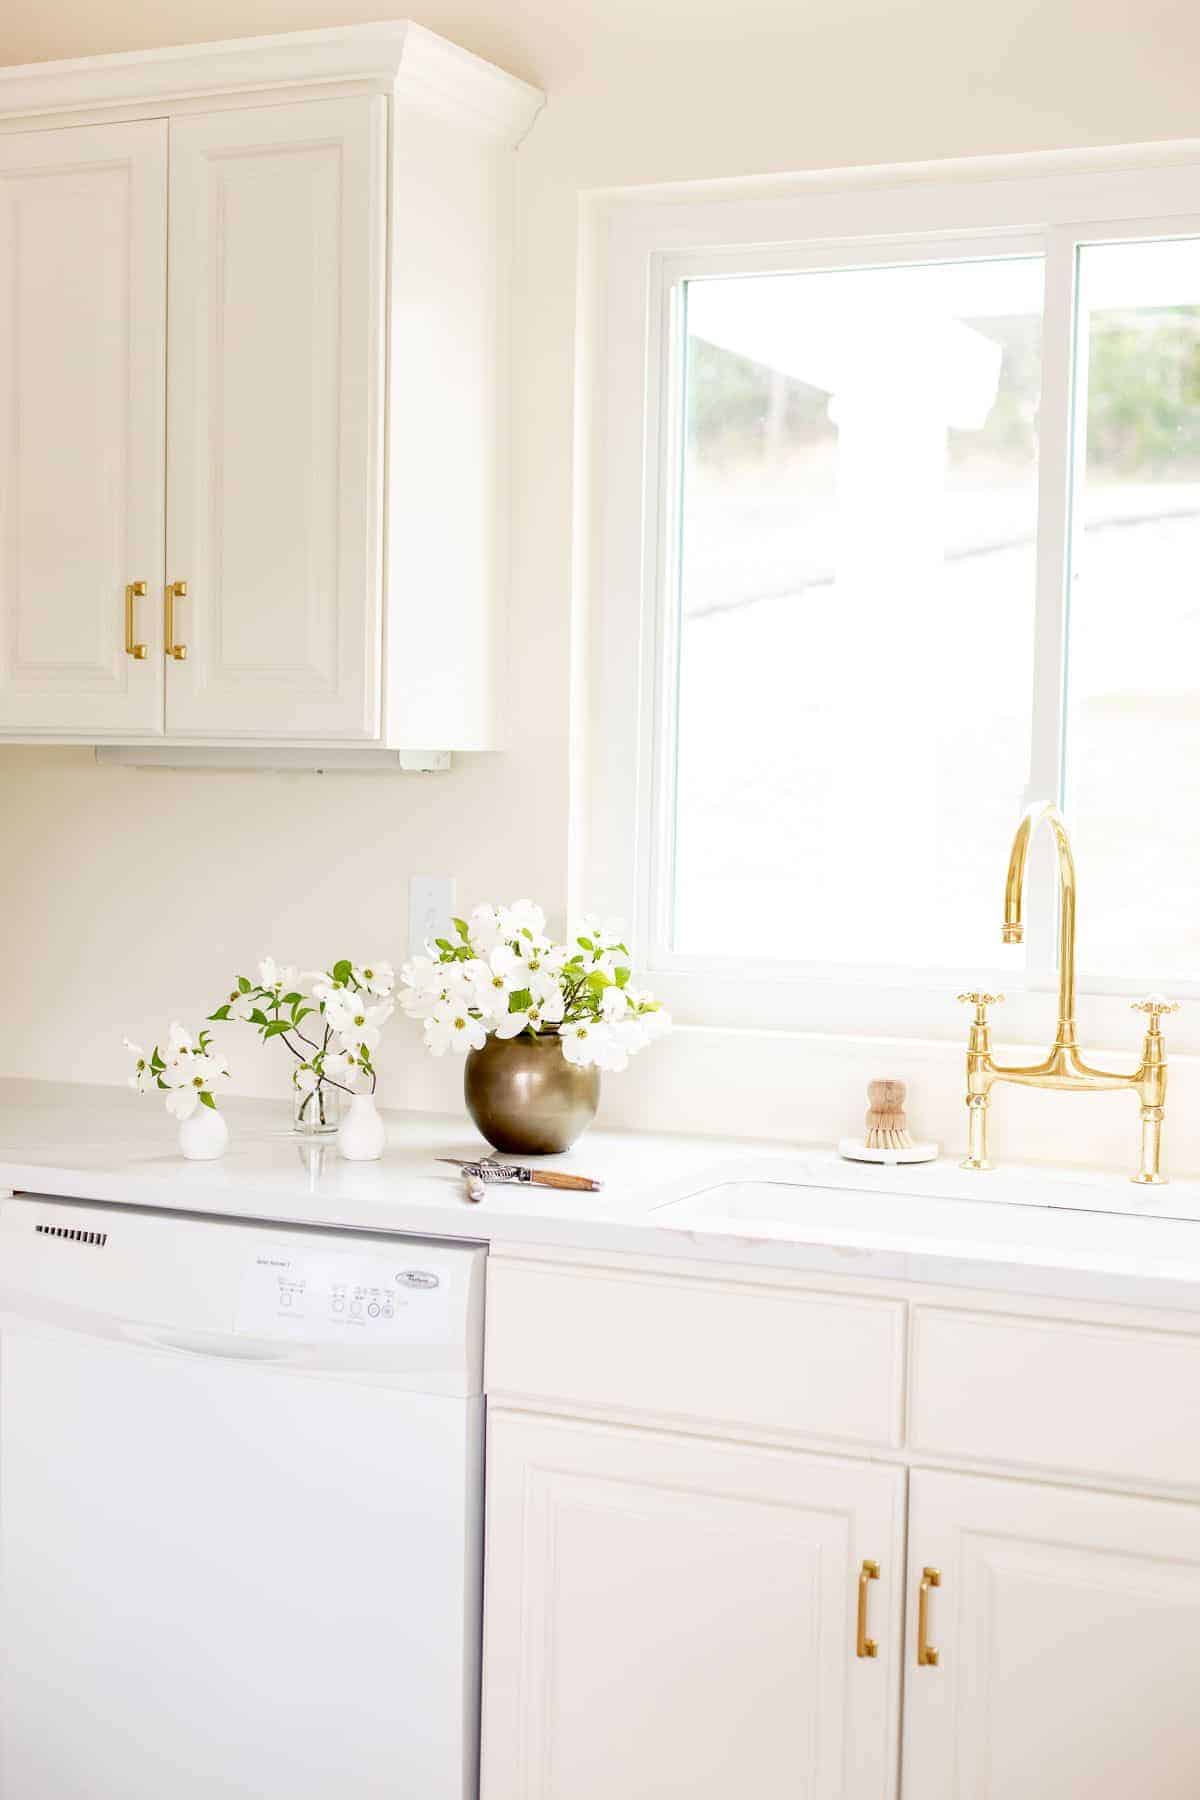 A white kitchen sink area with a brass bridge faucet, window over the sink and vase of flowers to the side.